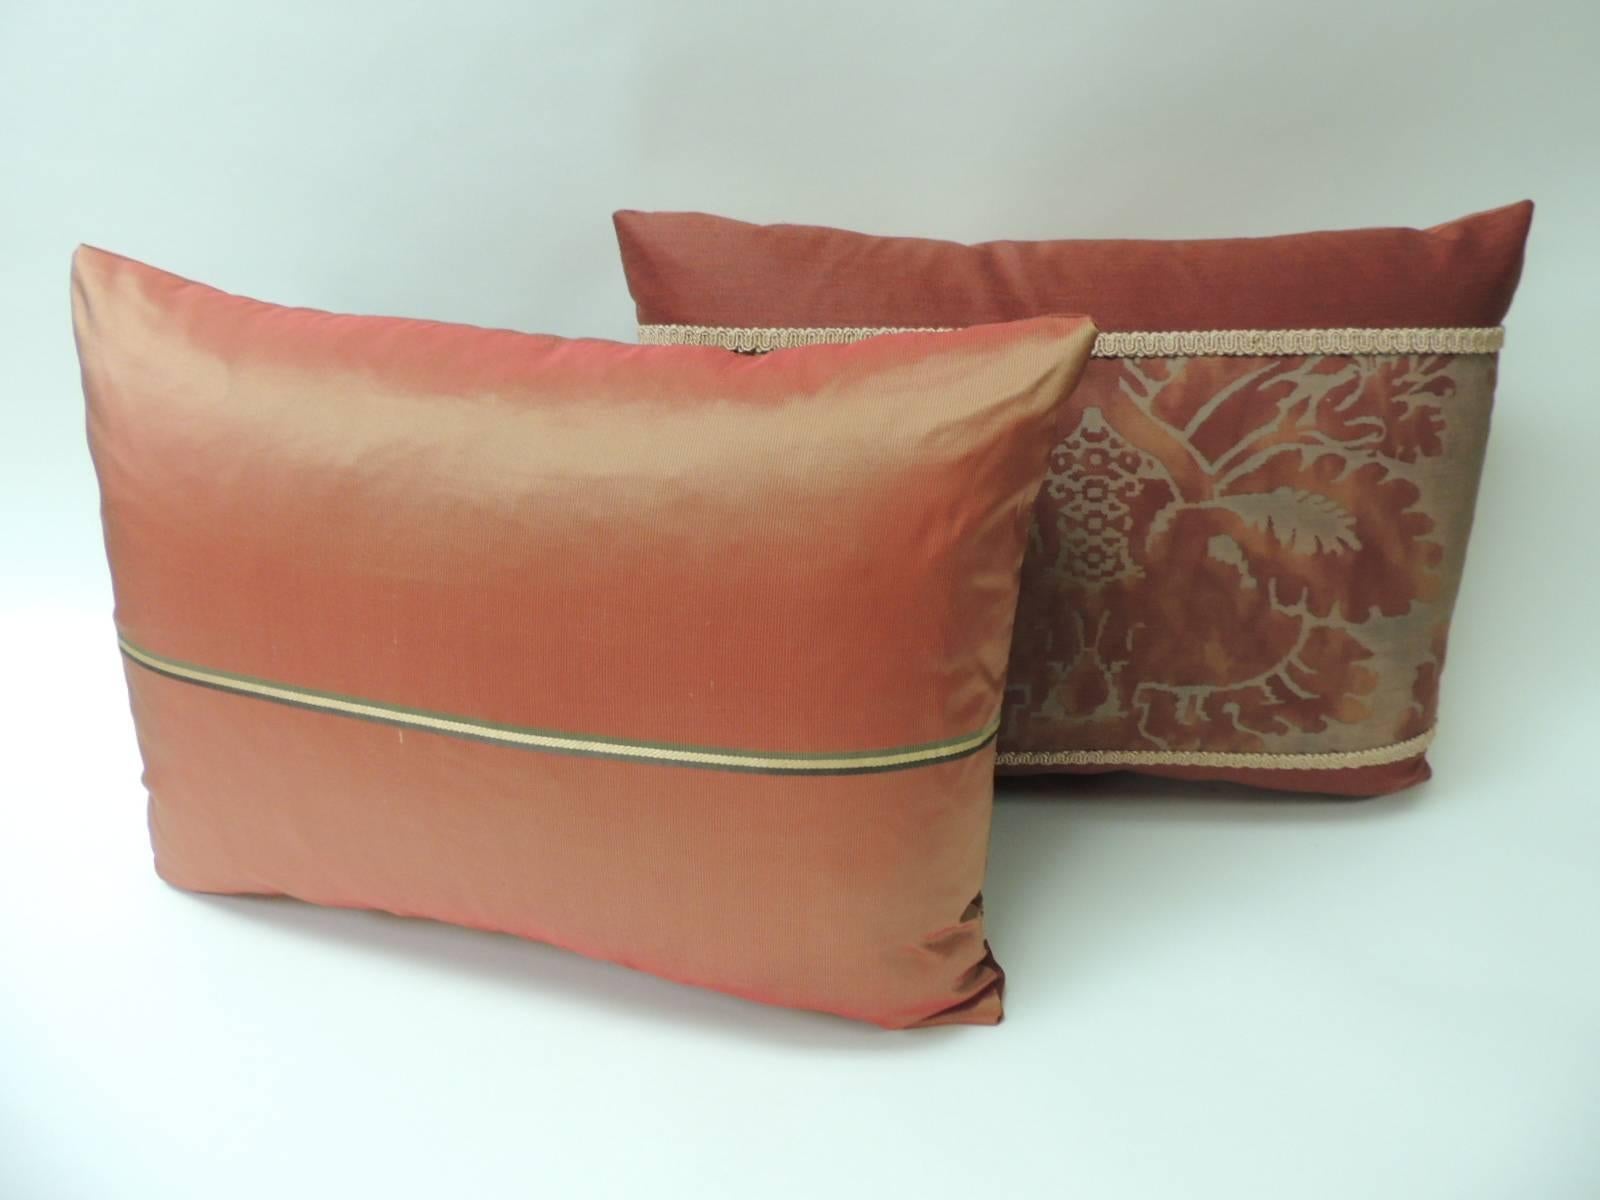 Regency Pair of Vintage Fortuny “Glicine” Red and Silvery Bolster Decorative Pillows